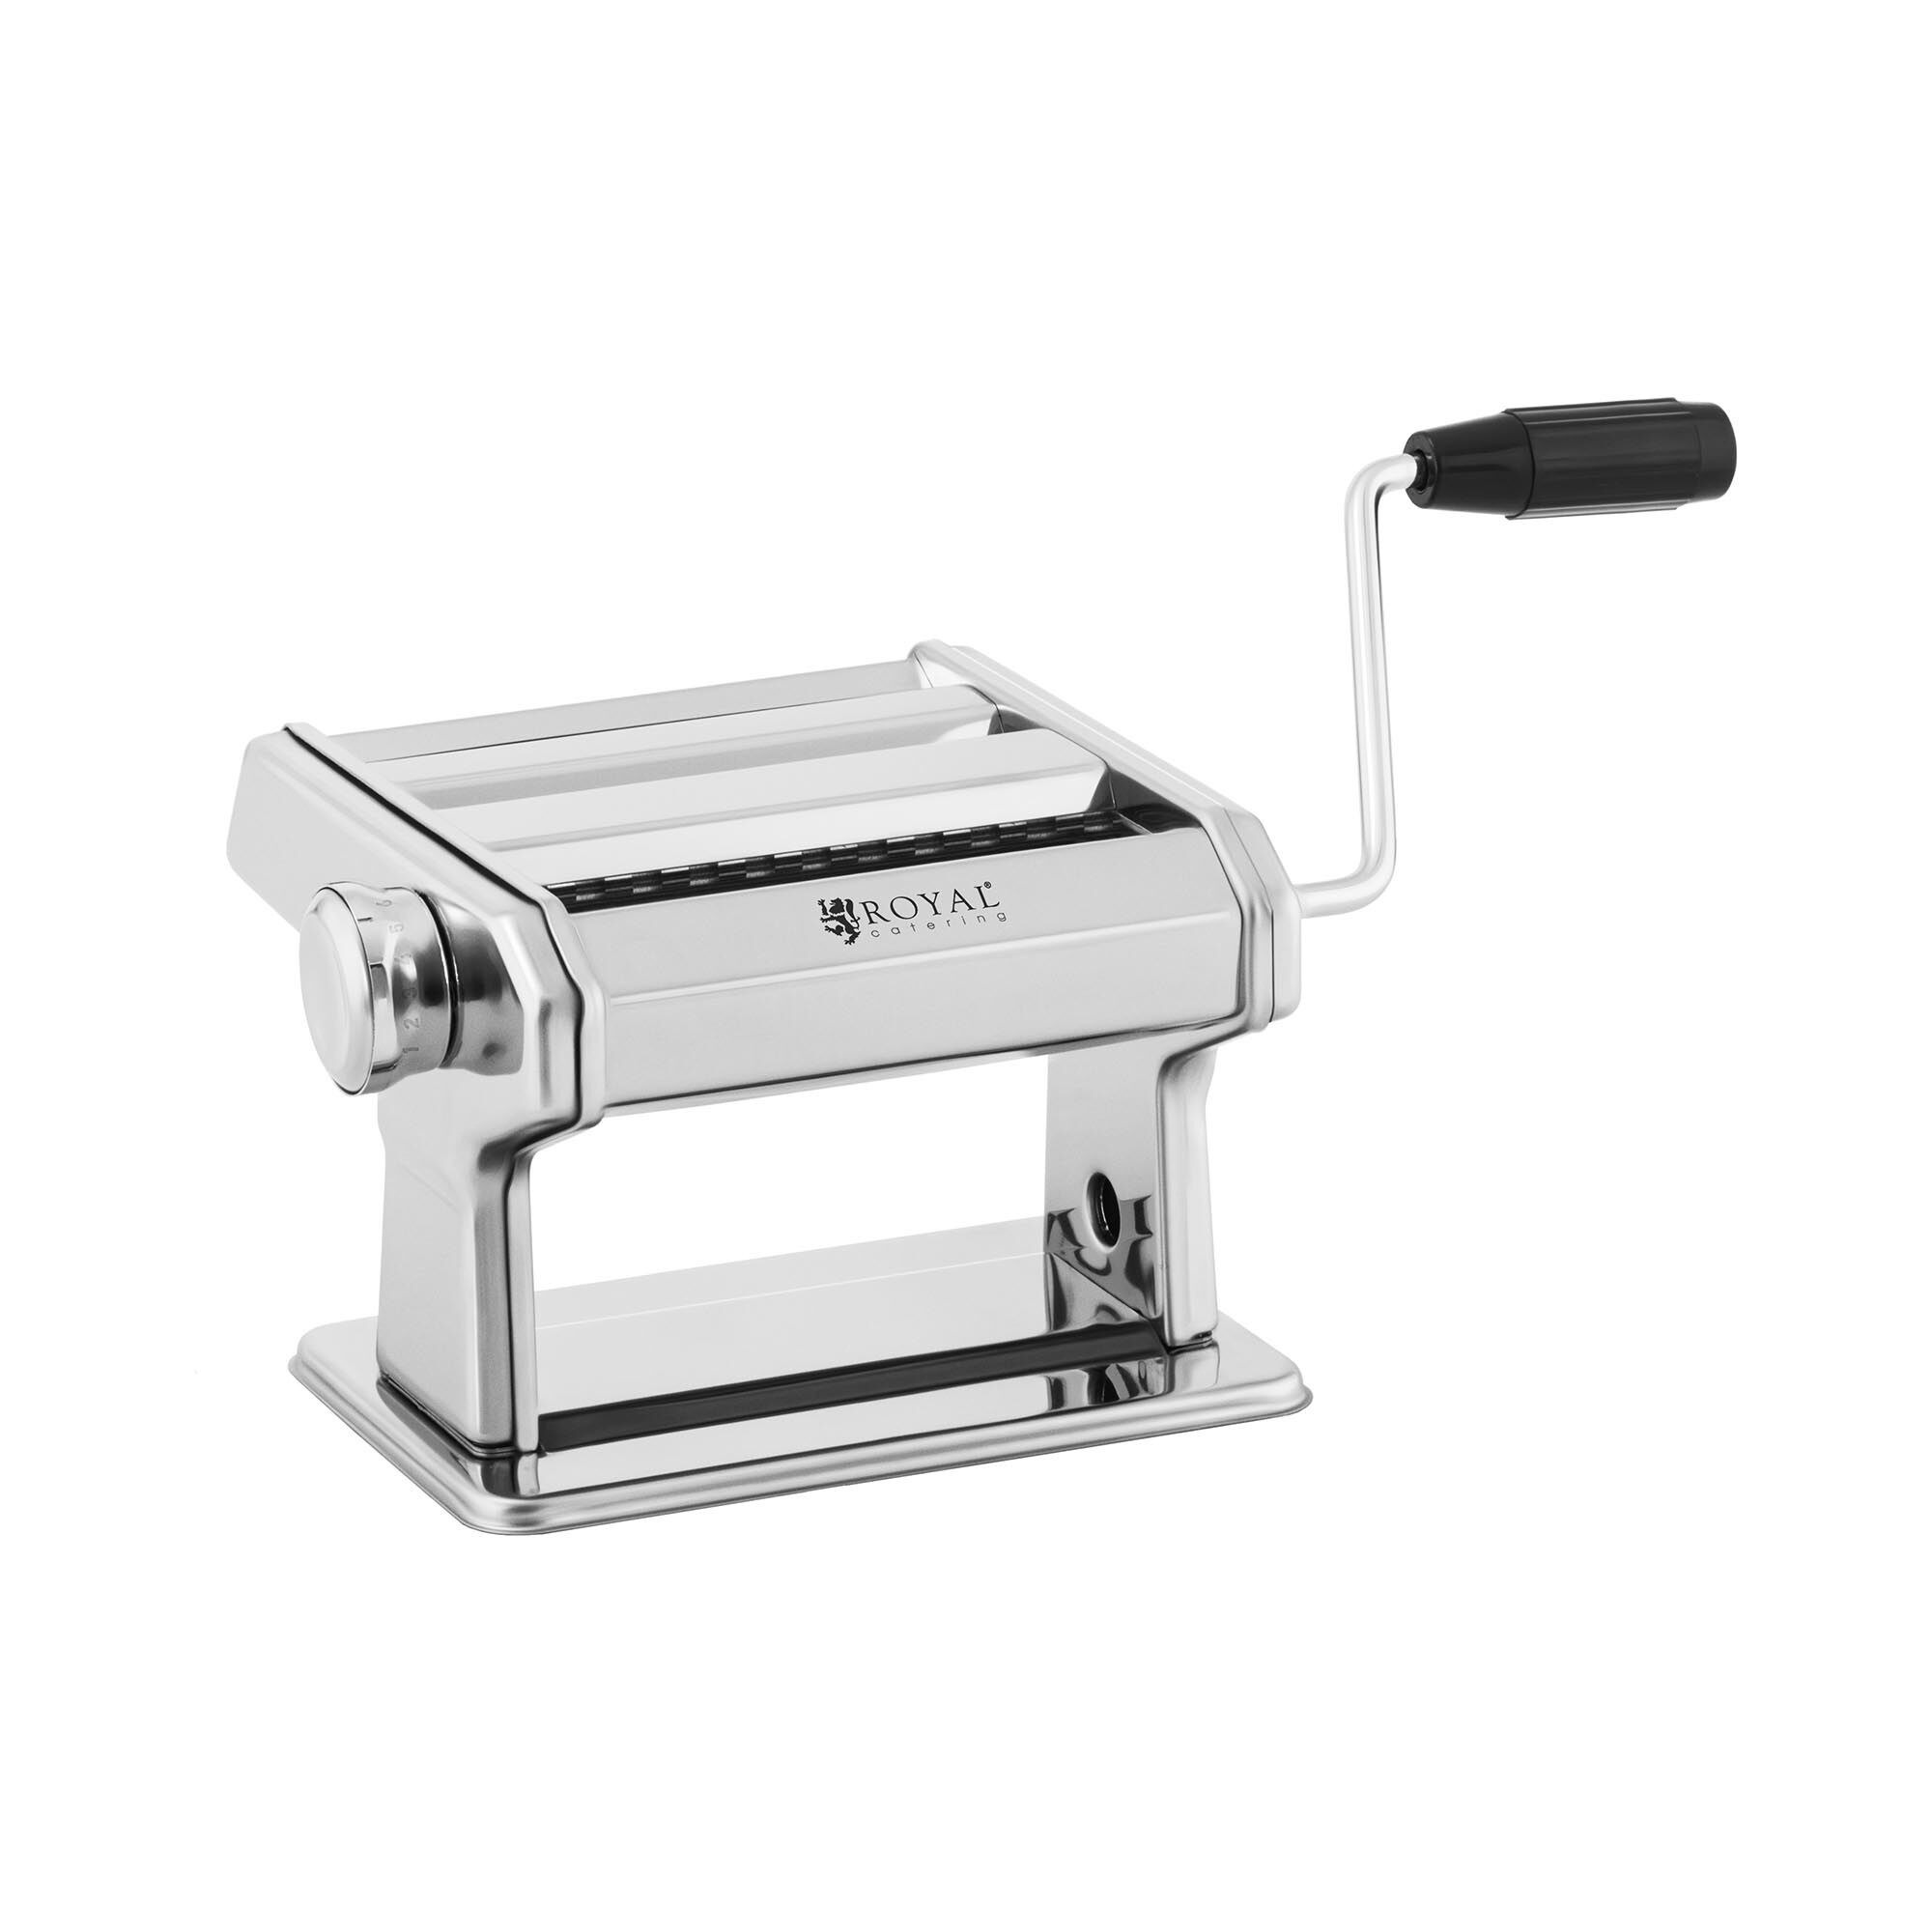 Royal Catering Nudelmaschine - 14 cm - 0,5 bis 3 mm - manuell